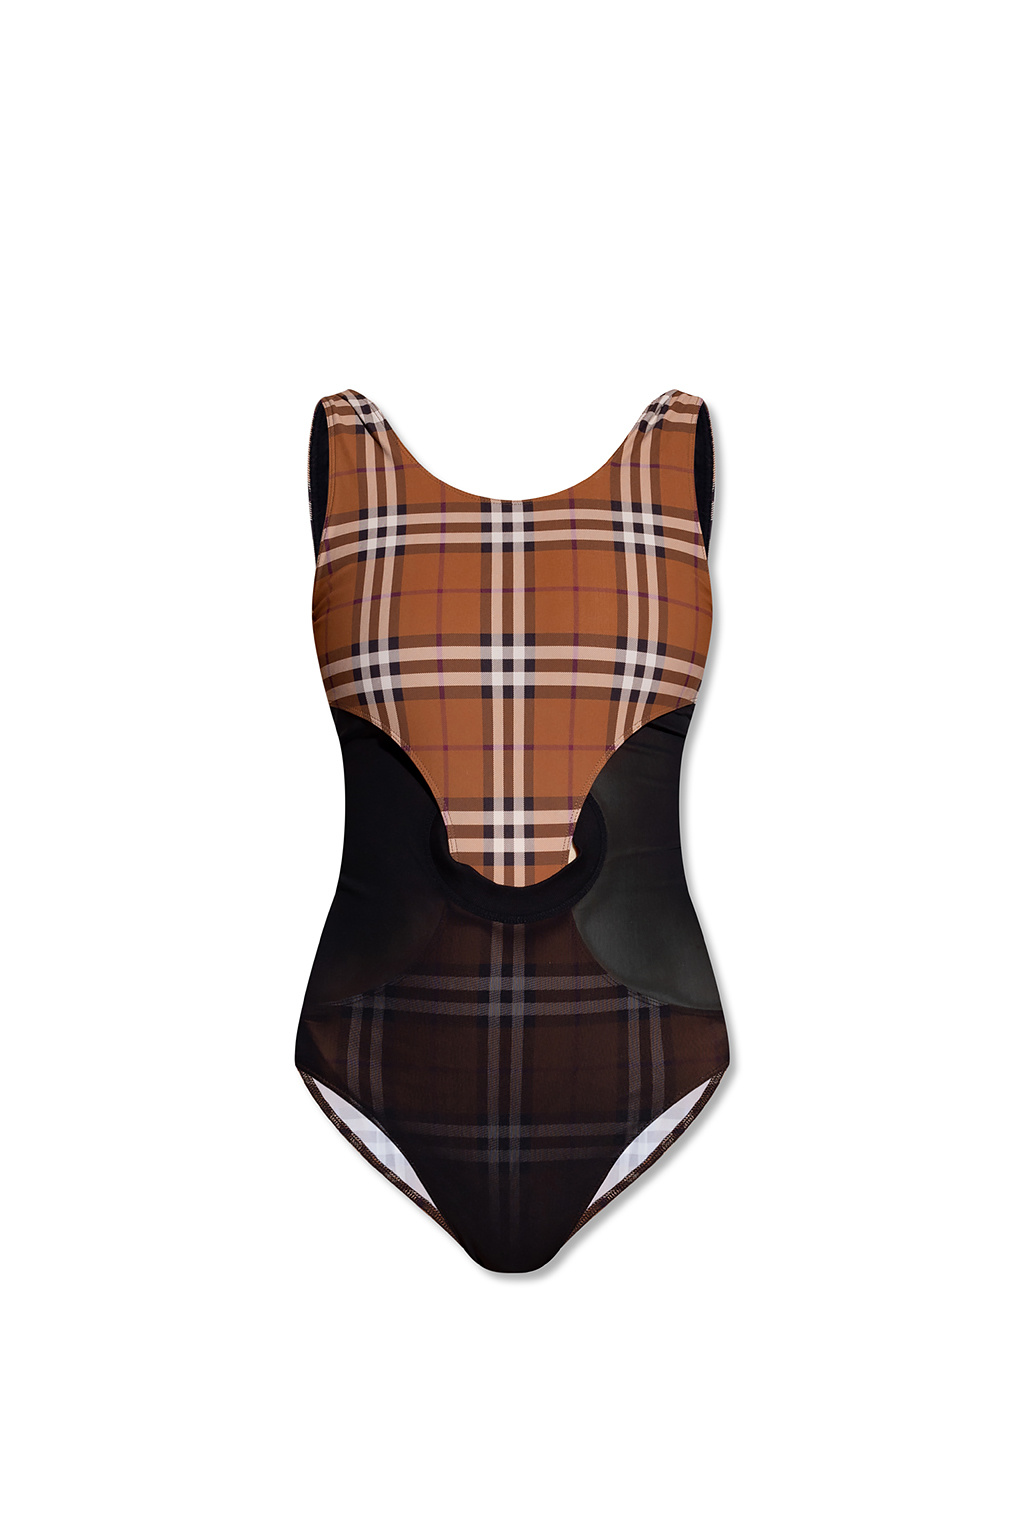 burberry cashmere ‘Madison’ checked body